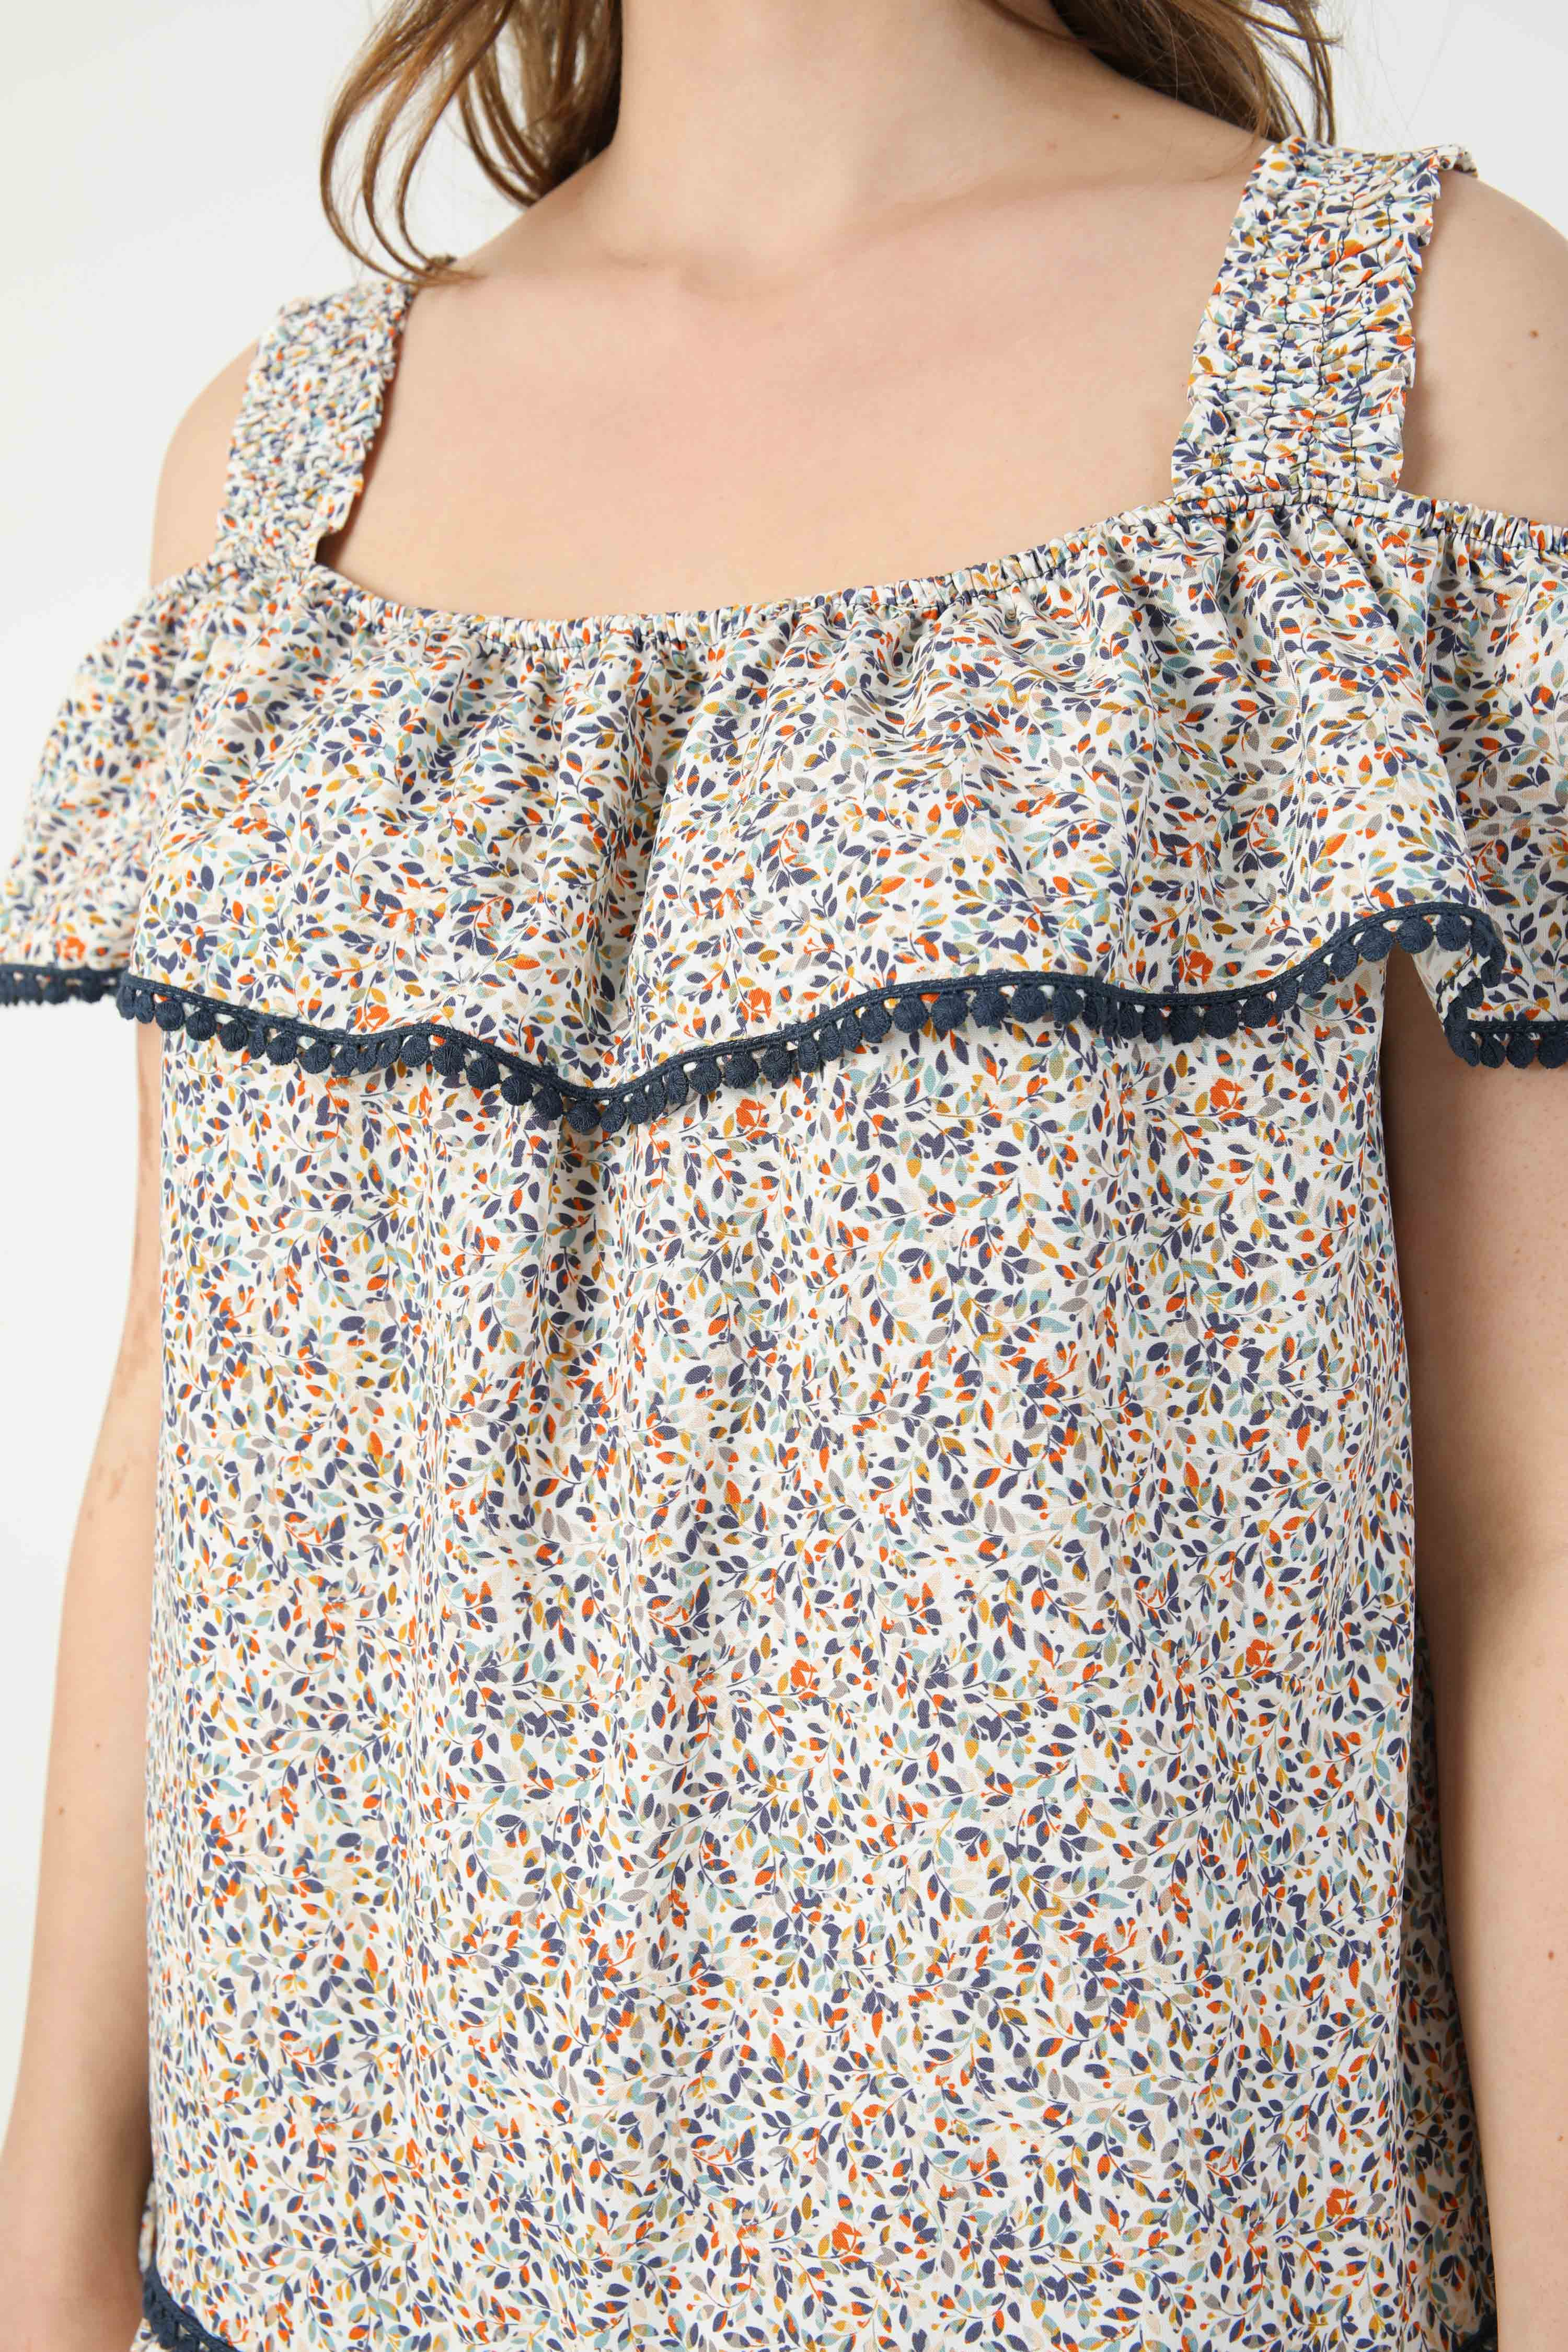 Printed blouse with suspenders (shipping May 5/10)